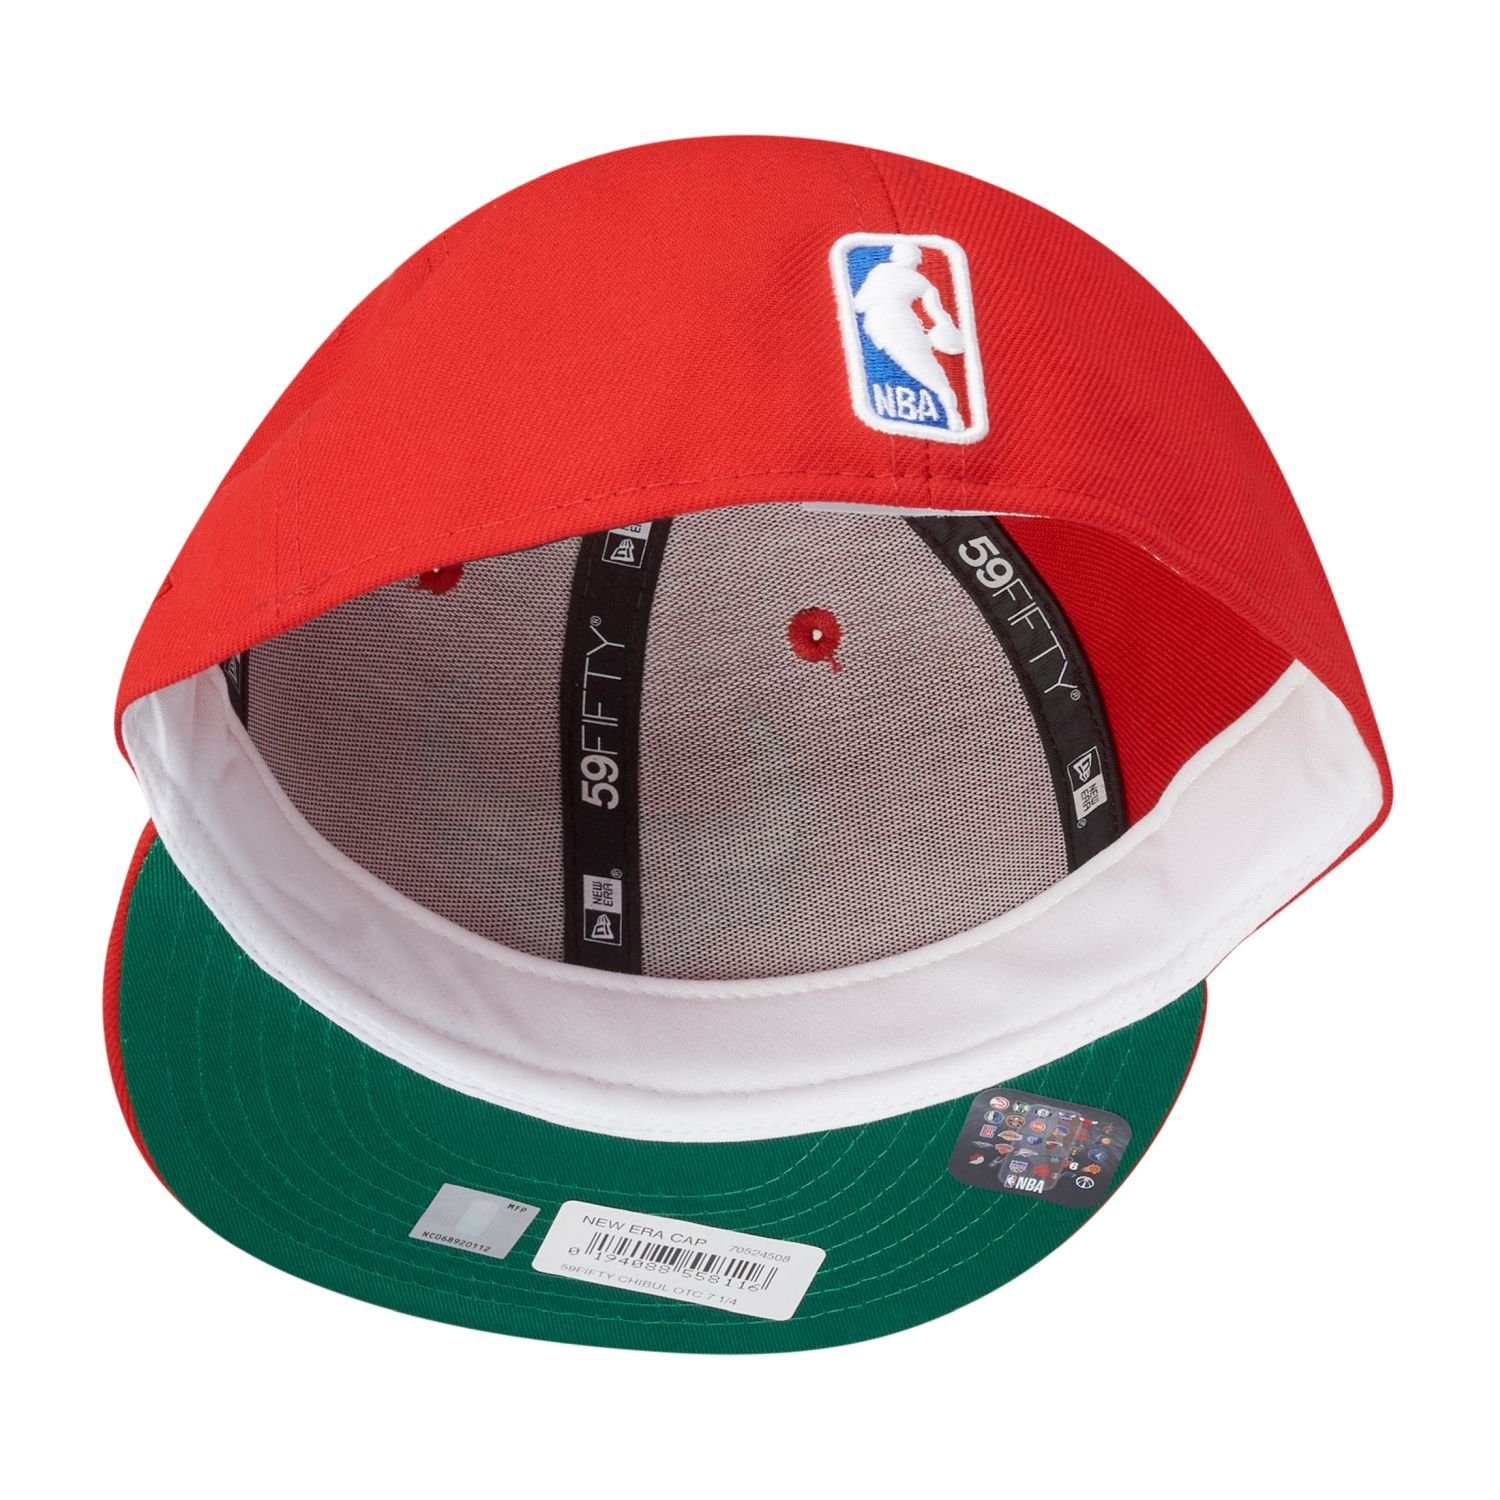 Era 59Fifty NBA Bulls Cap New Fitted Chicago